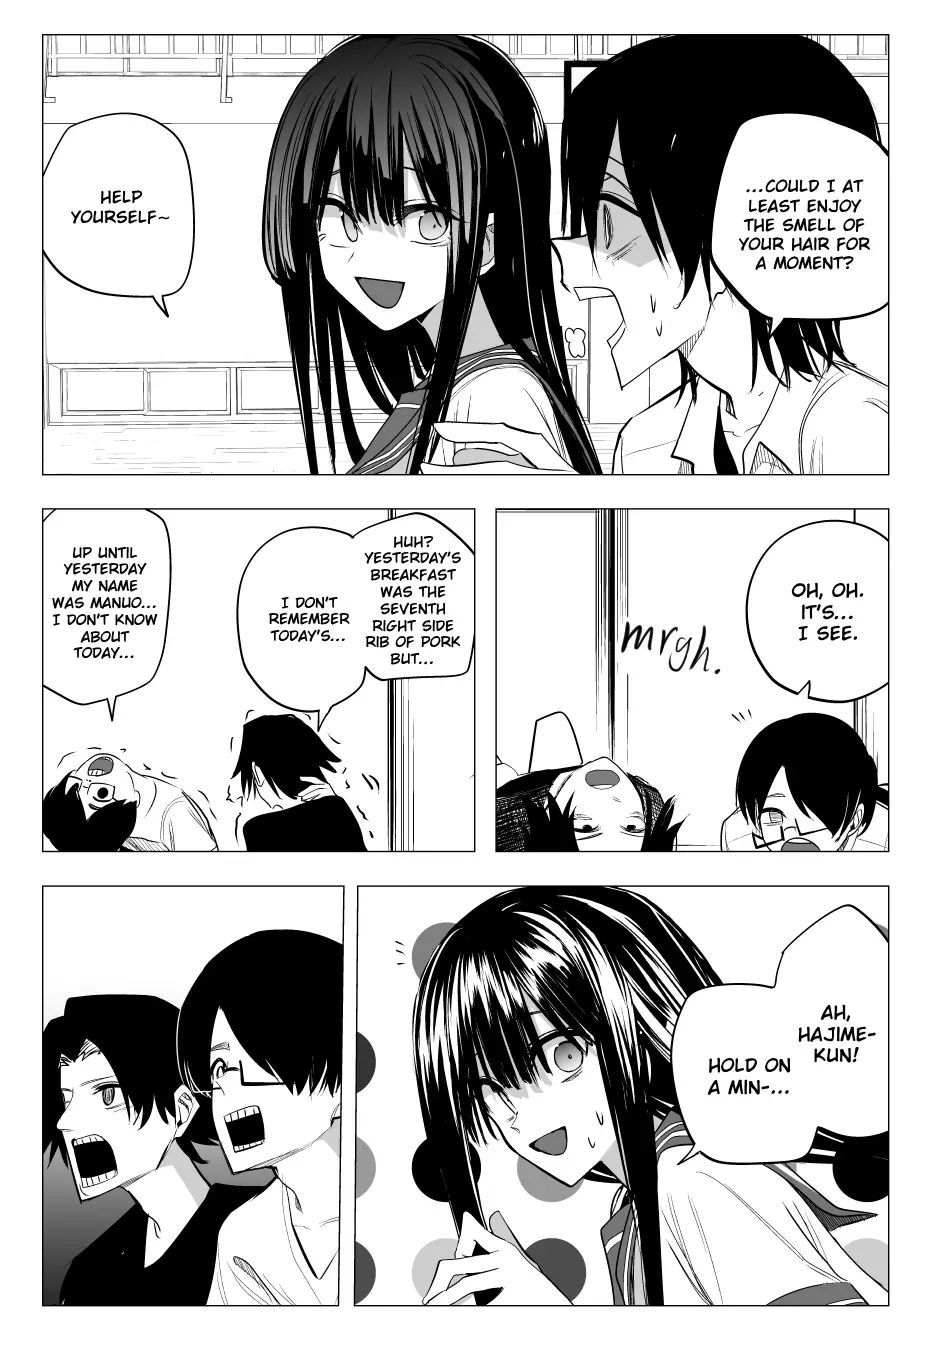 Mitsuishi-San Is Being Weird This Year - 34 page 13-80534165